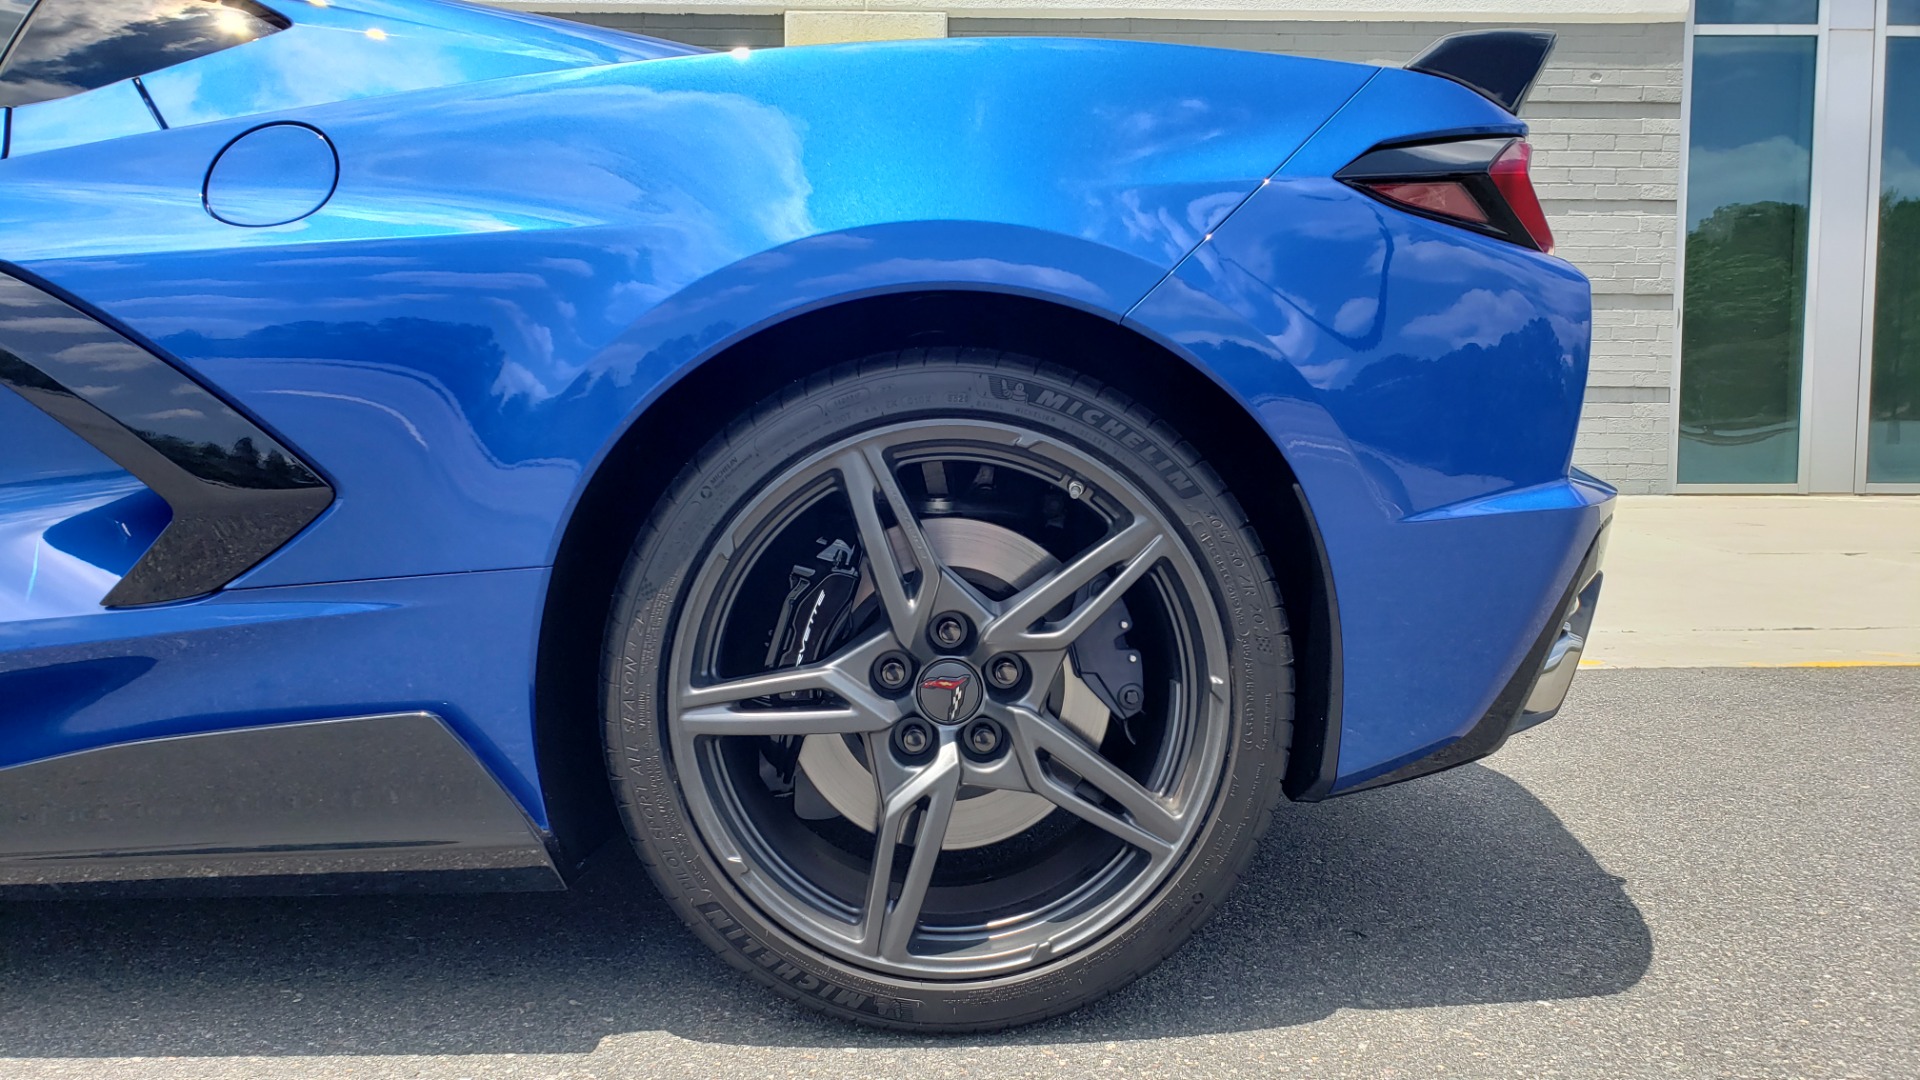 Used 2020 Chevrolet CORVETTE C8 STINGRAY COUPE 2LT / PERF & Z51 PKG / NAV / BOSE / 8-SPD AUTO / REARVIEW for sale Sold at Formula Imports in Charlotte NC 28227 54